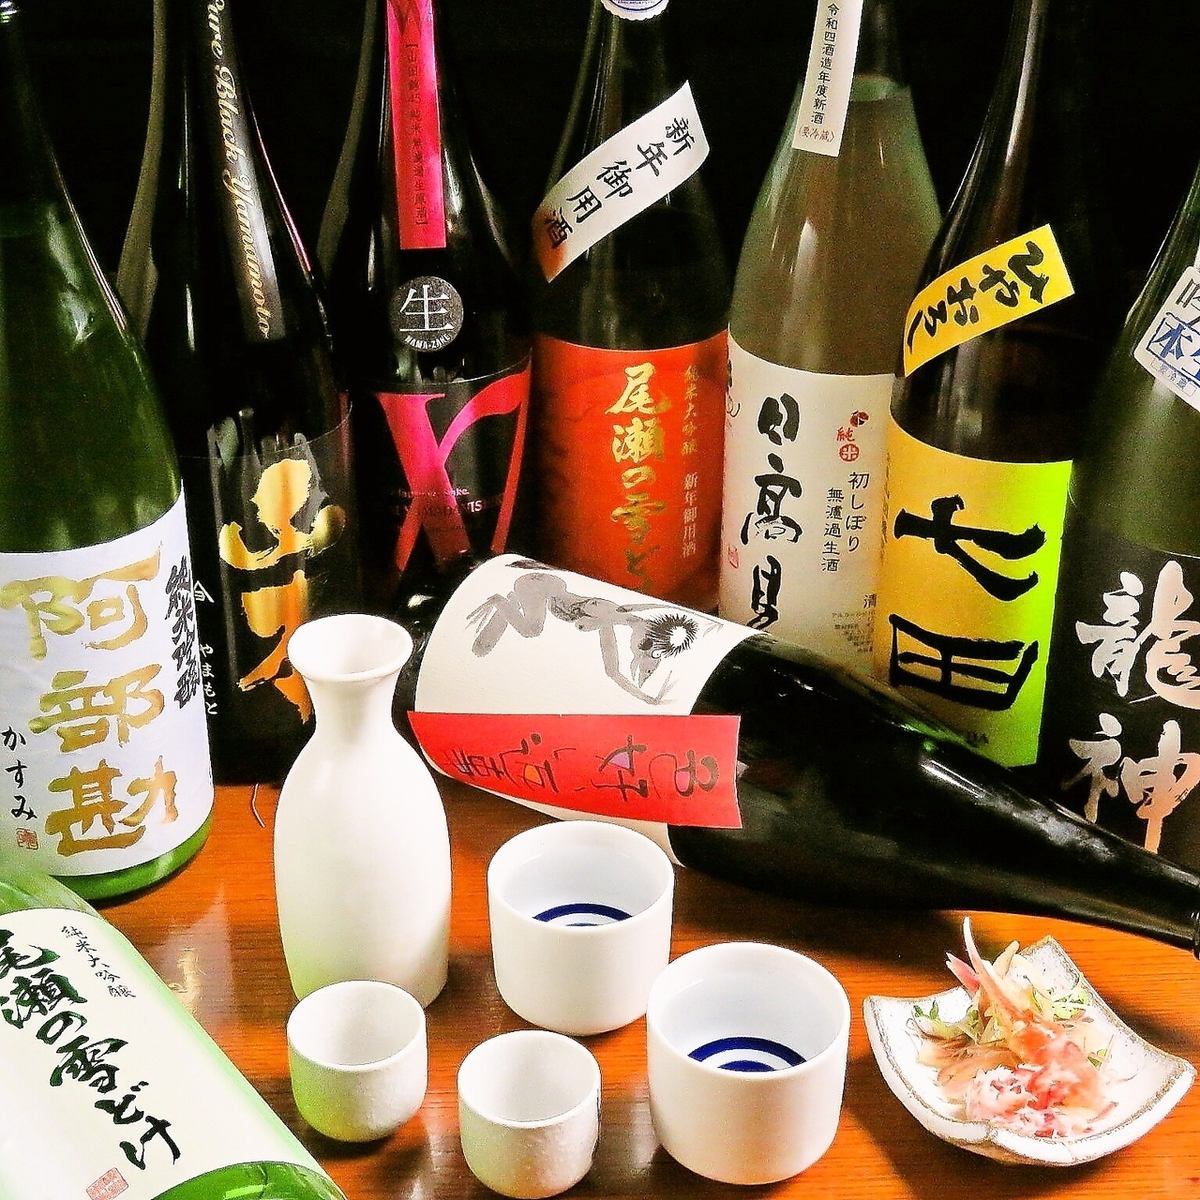 There are plenty of local sake carefully selected from all over the country! Have a blissful time with our proud seafood dishes♪